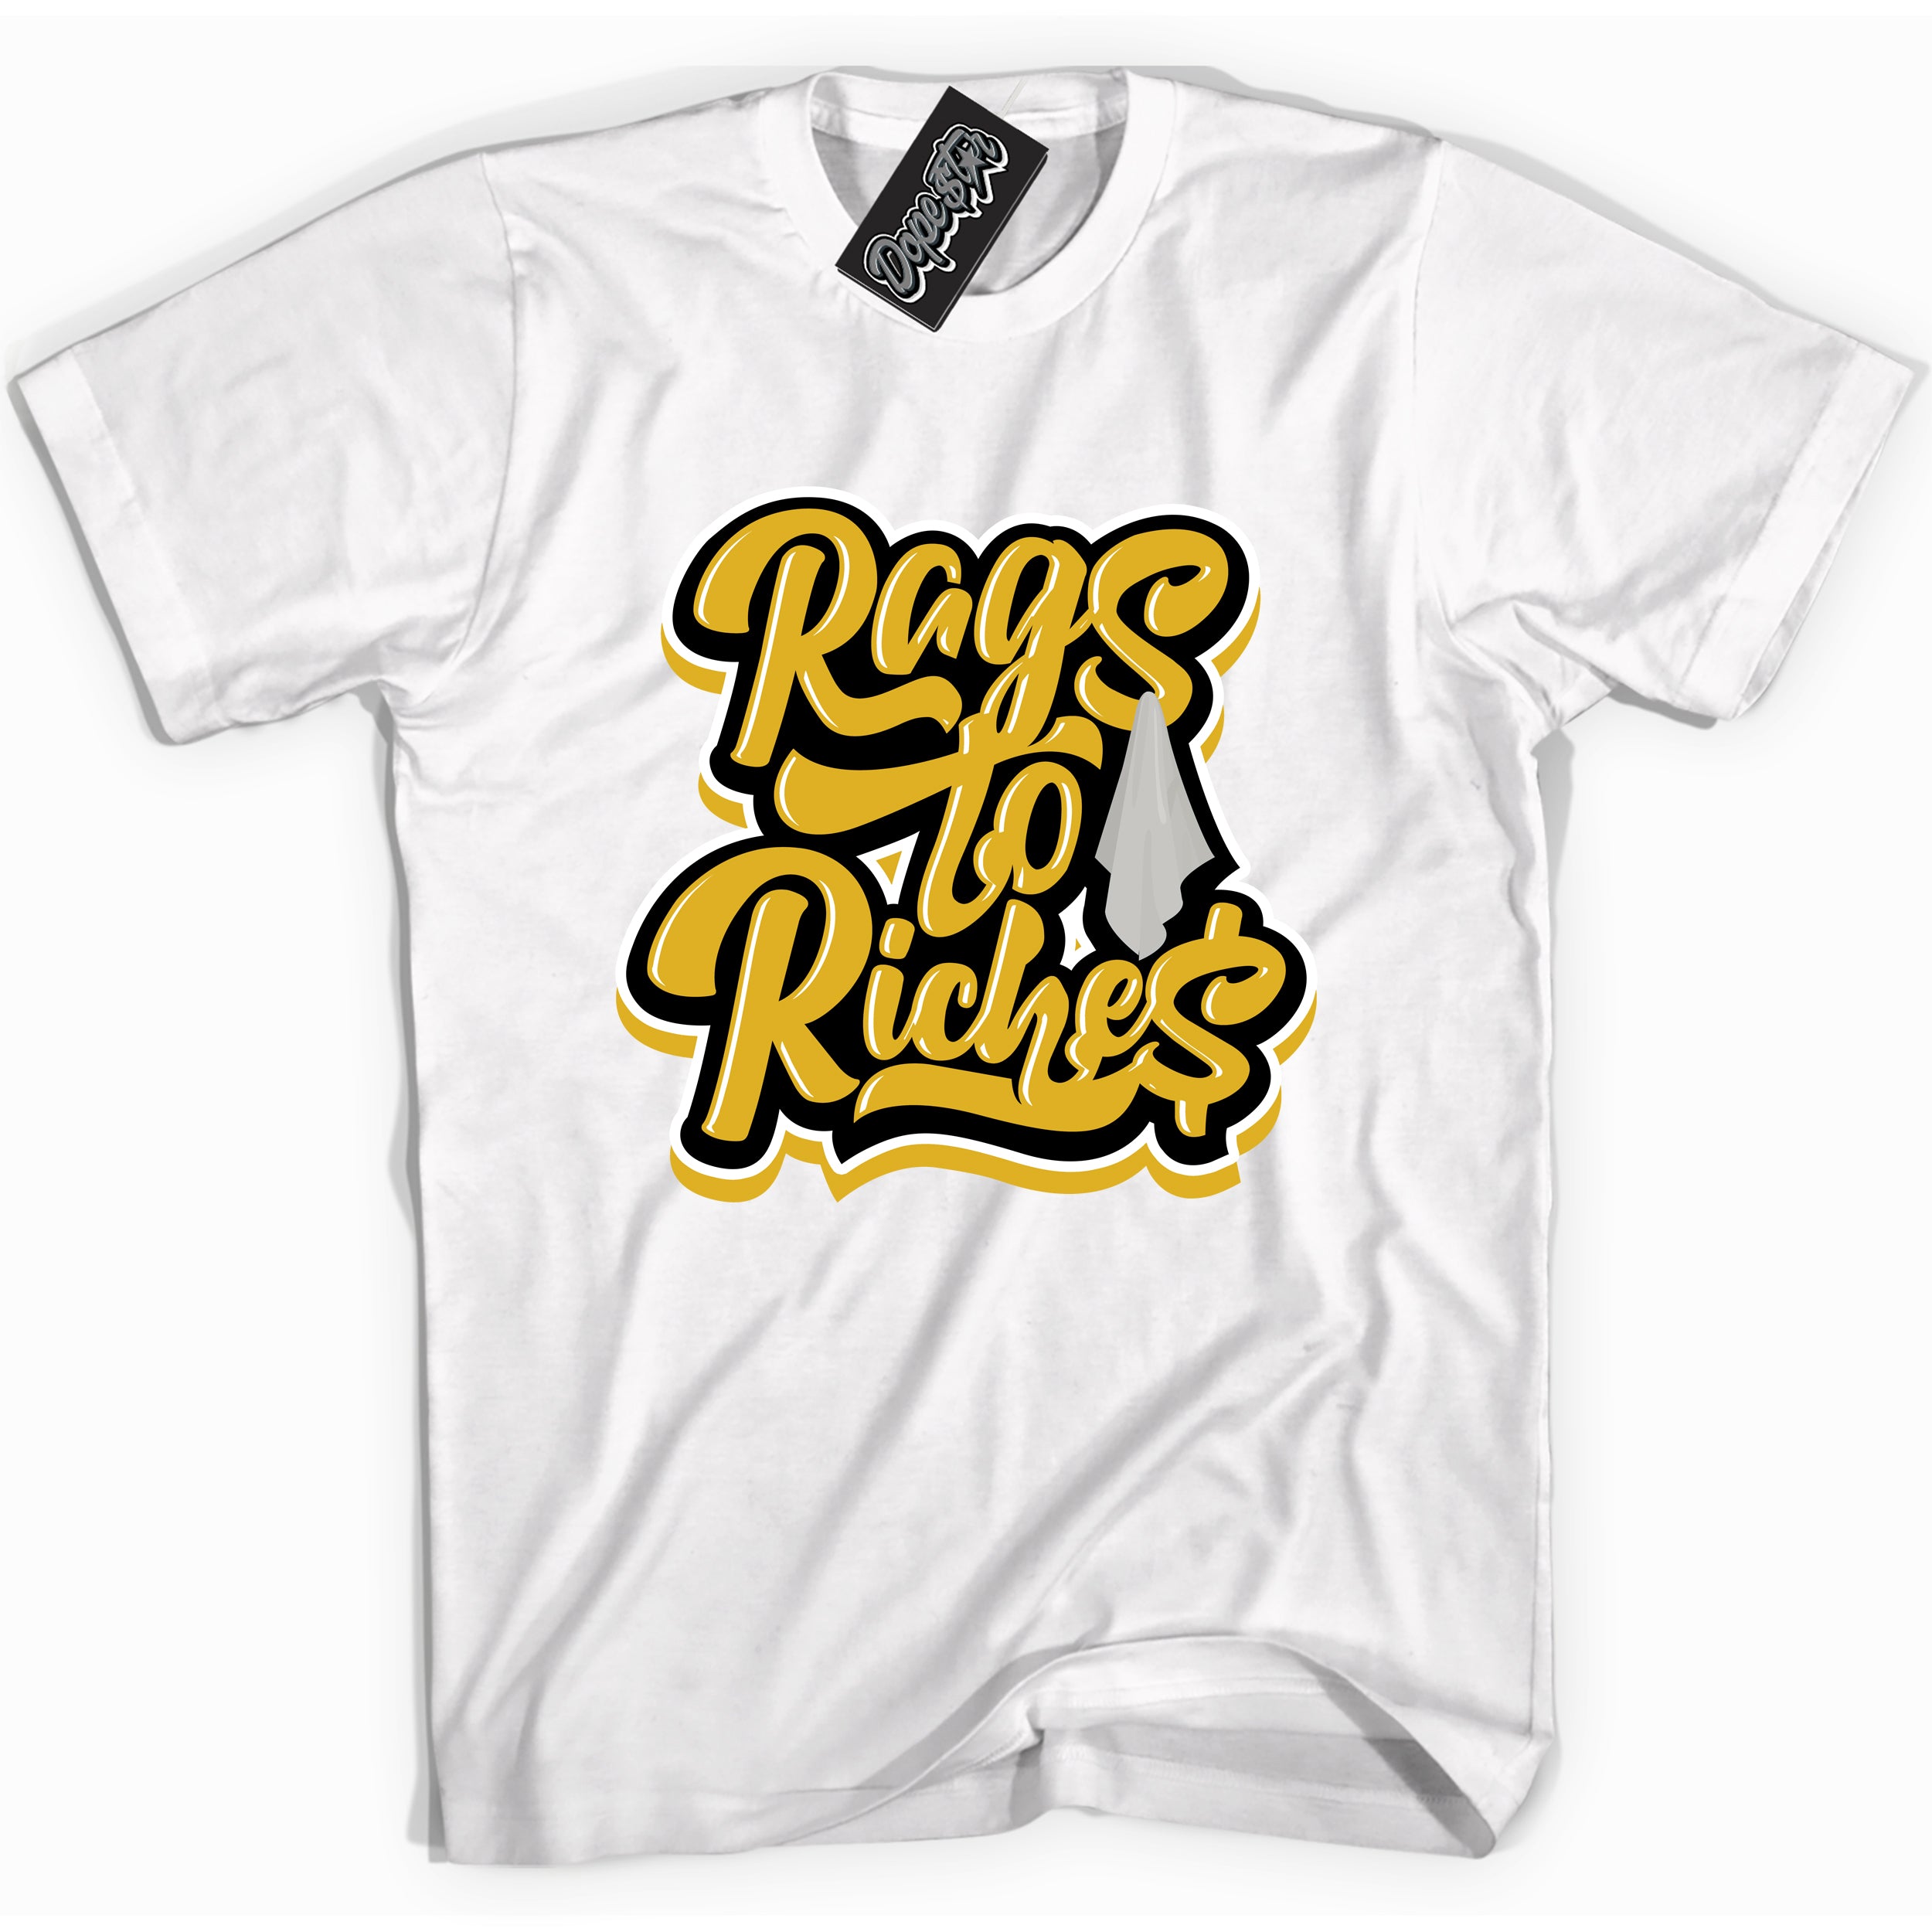 Cool White Shirt with “ Rags To Riches” design that perfectly matches Yellow Ochre 6s Sneakers.